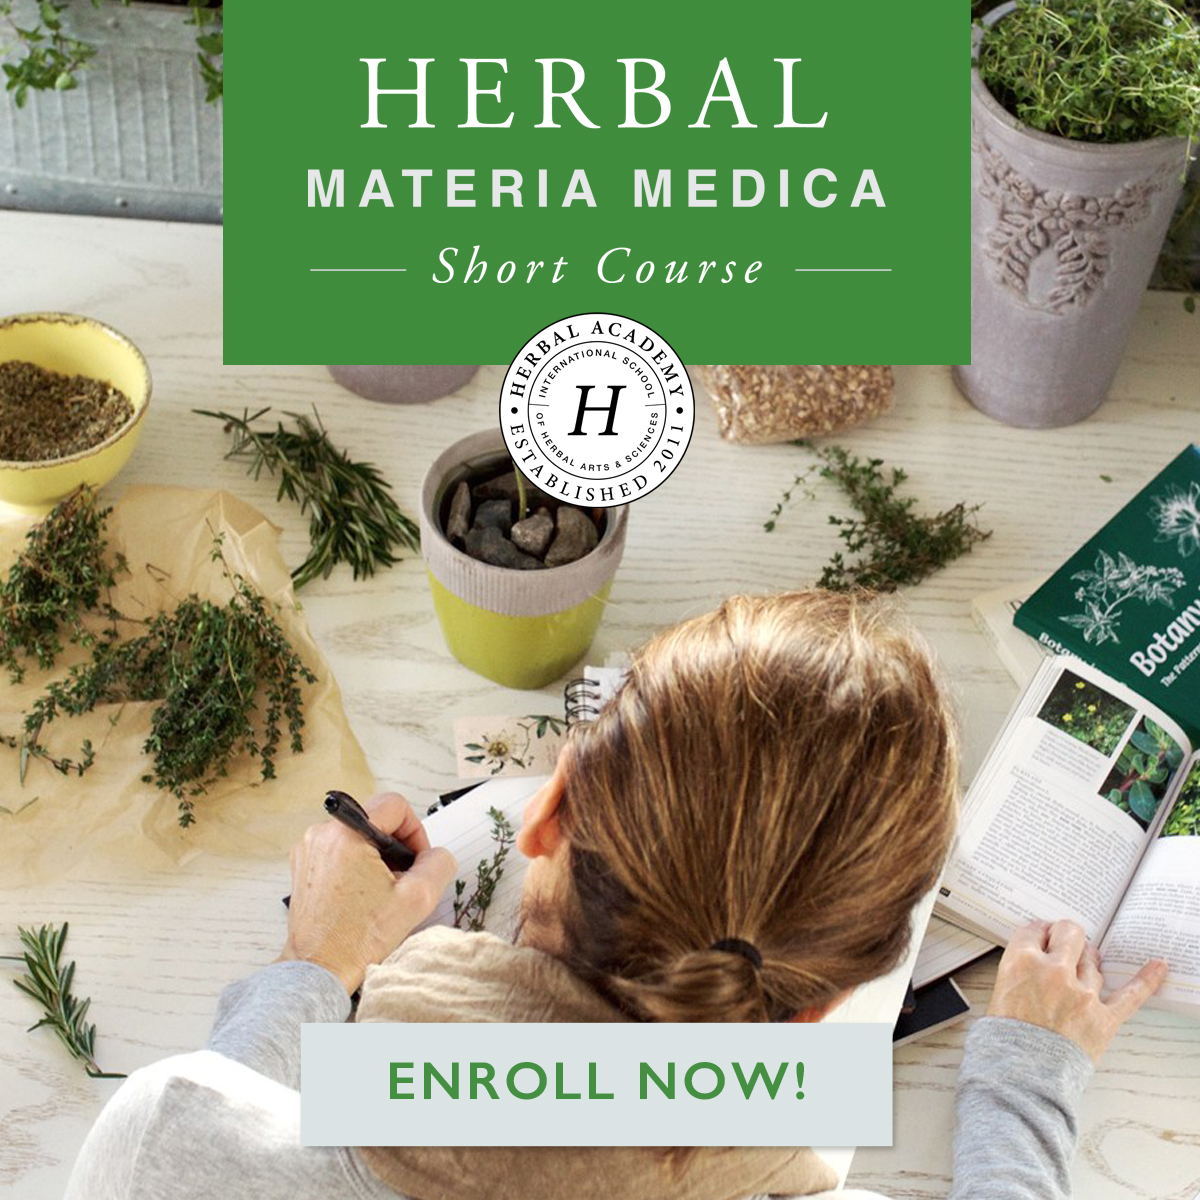 Gathering Supplies for your Herbal Materia Medica | Herbal Academy | Learn what supplies you should have on hand when creating your herbal materia medica right here!